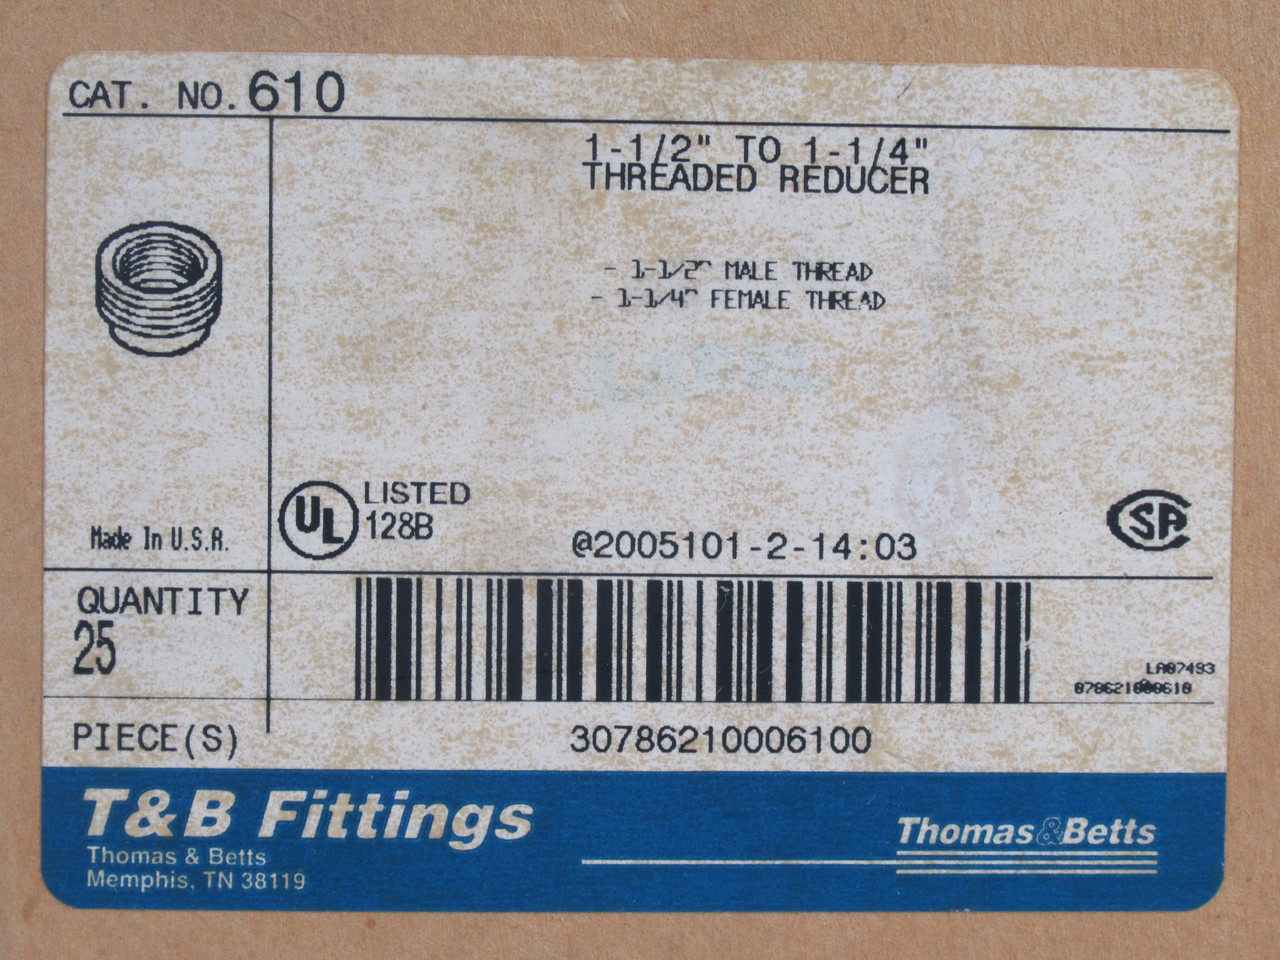 Thomas & Betts 610 Threaded Reducer 1-1/2" Male 1-1/4" Female Lot of 12 NEW